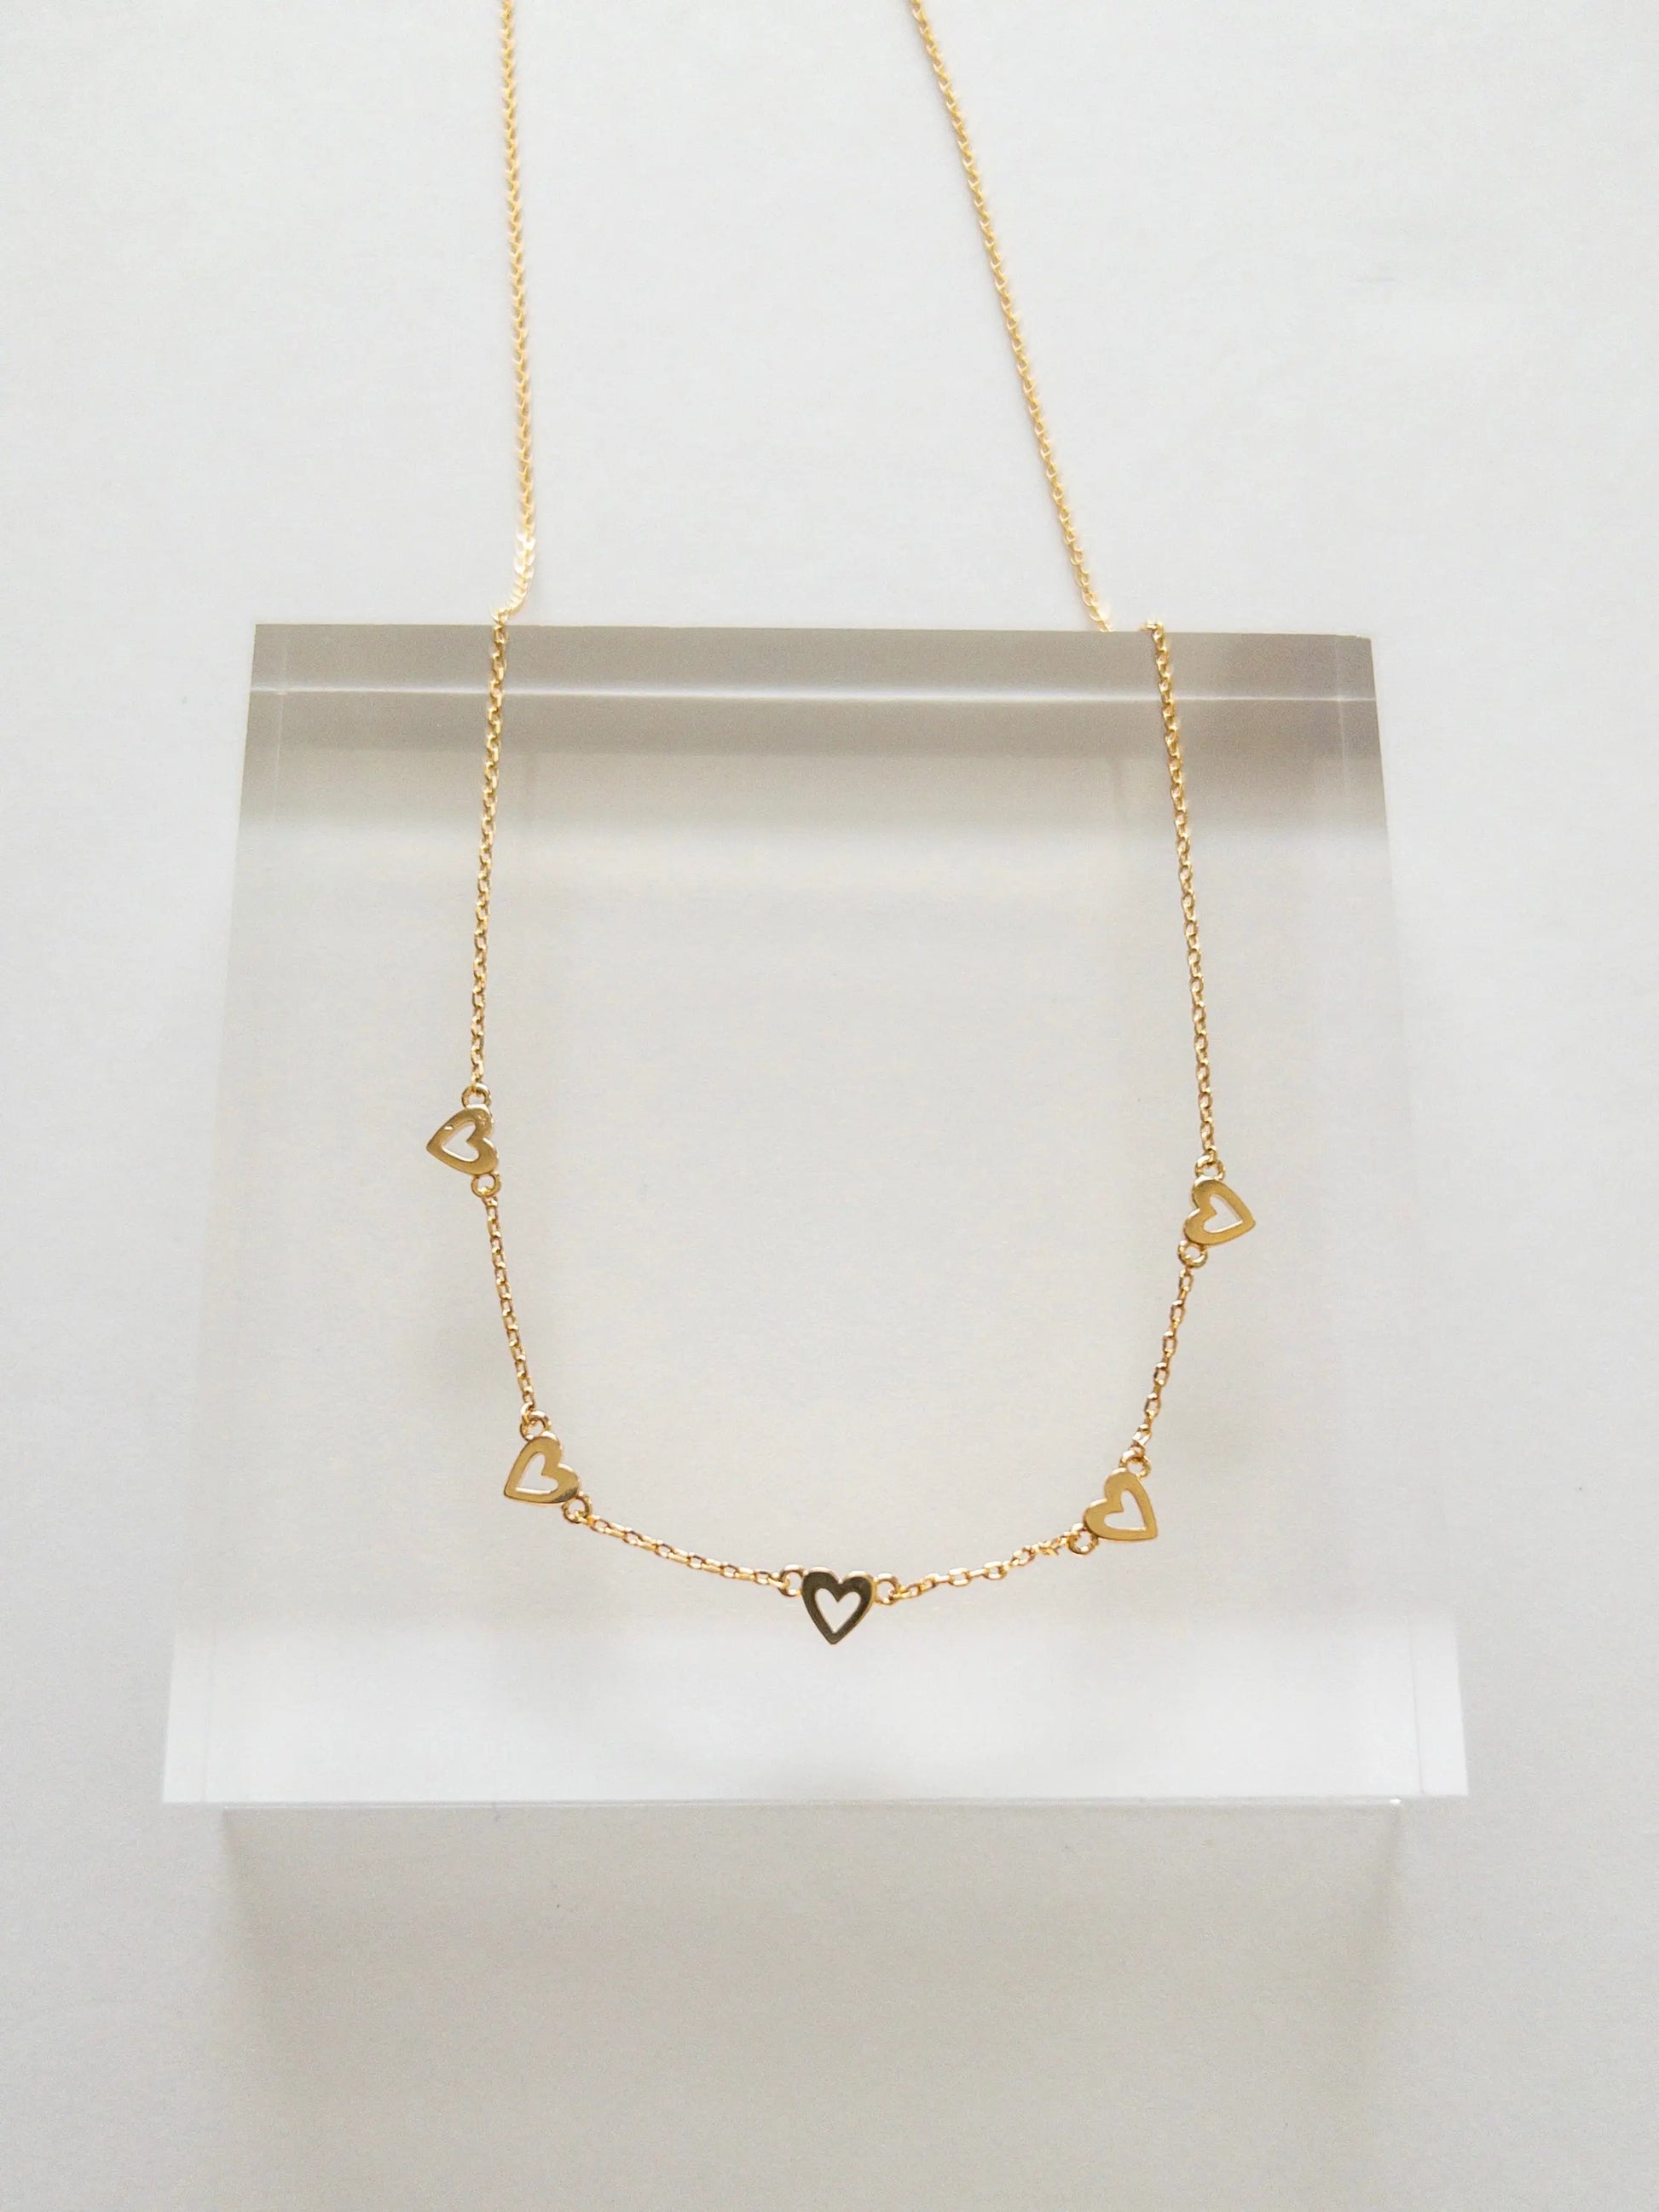 The Tiny Details Dainty Courage Gold Heart Necklace